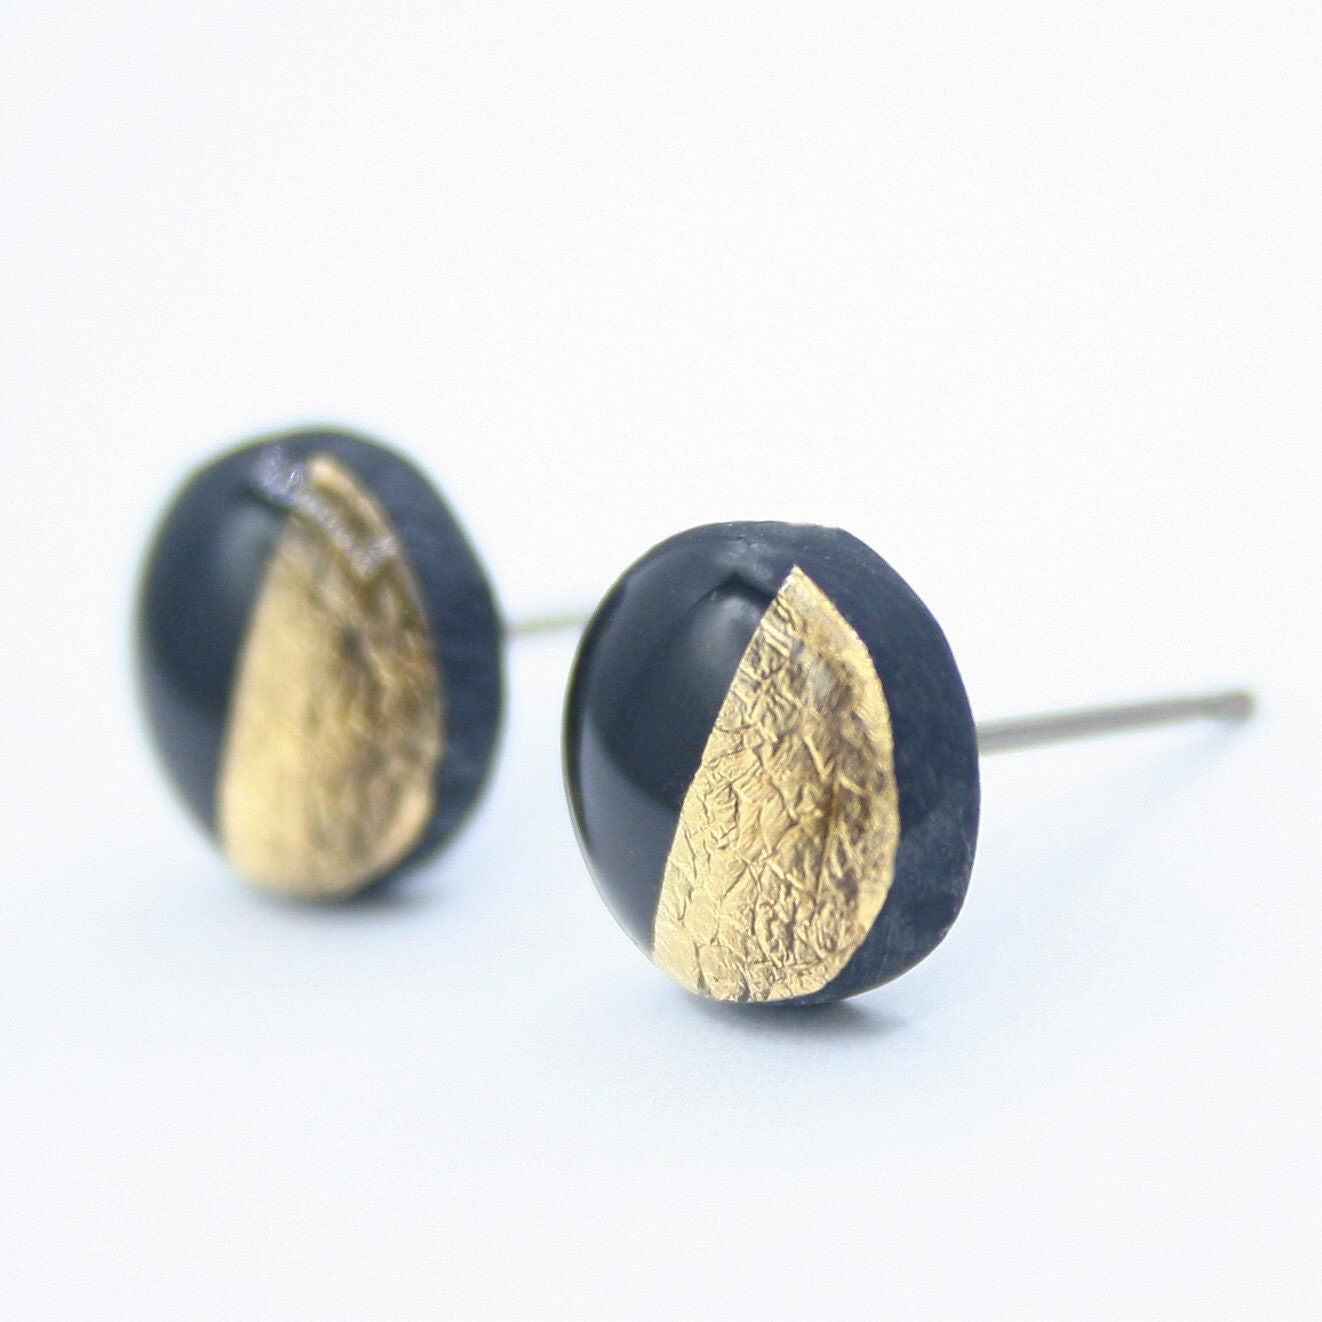 Black and Gold Stud Earrings Black Stud Earrings Gold and - Etsy